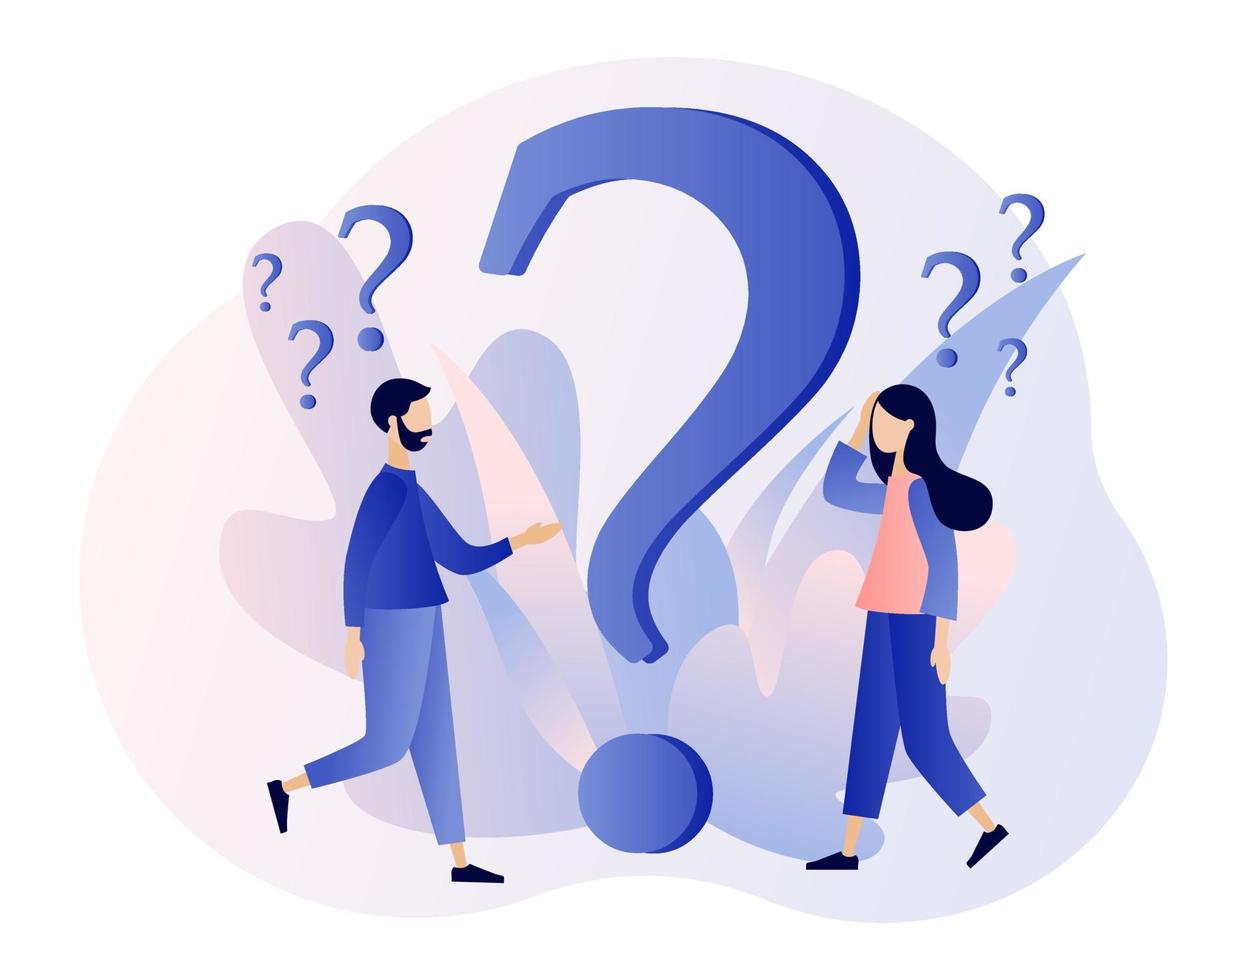 FAQ concept set. People around exclamations and question marks. Metaphor question answer. Modern flat cartoon style. Vector illustration